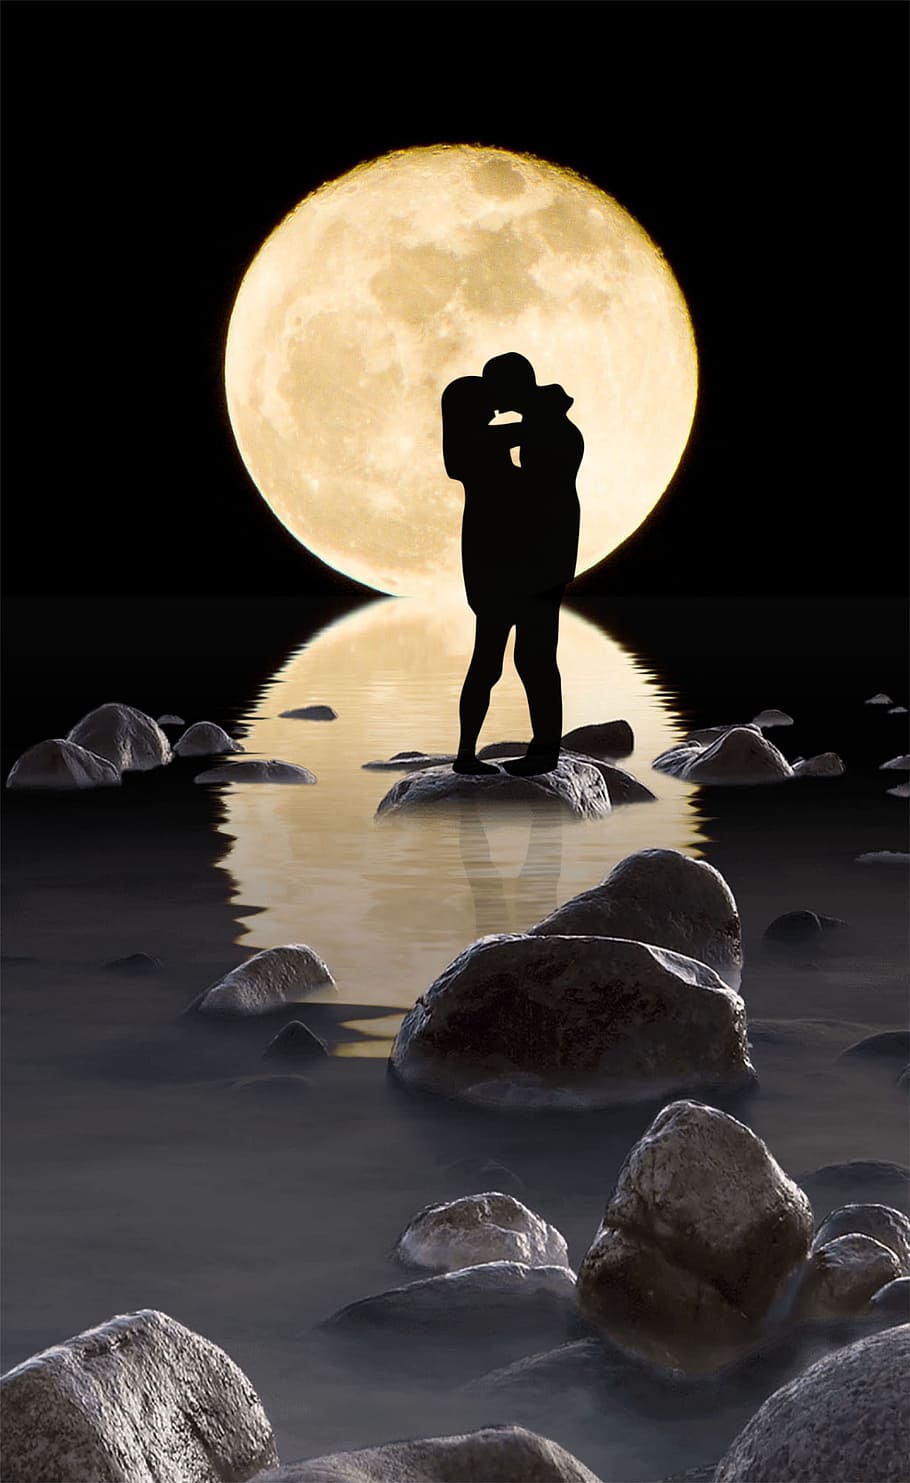 silhouette photo, man, woman, moon, couple, kiss, reflection, romantic, water, background